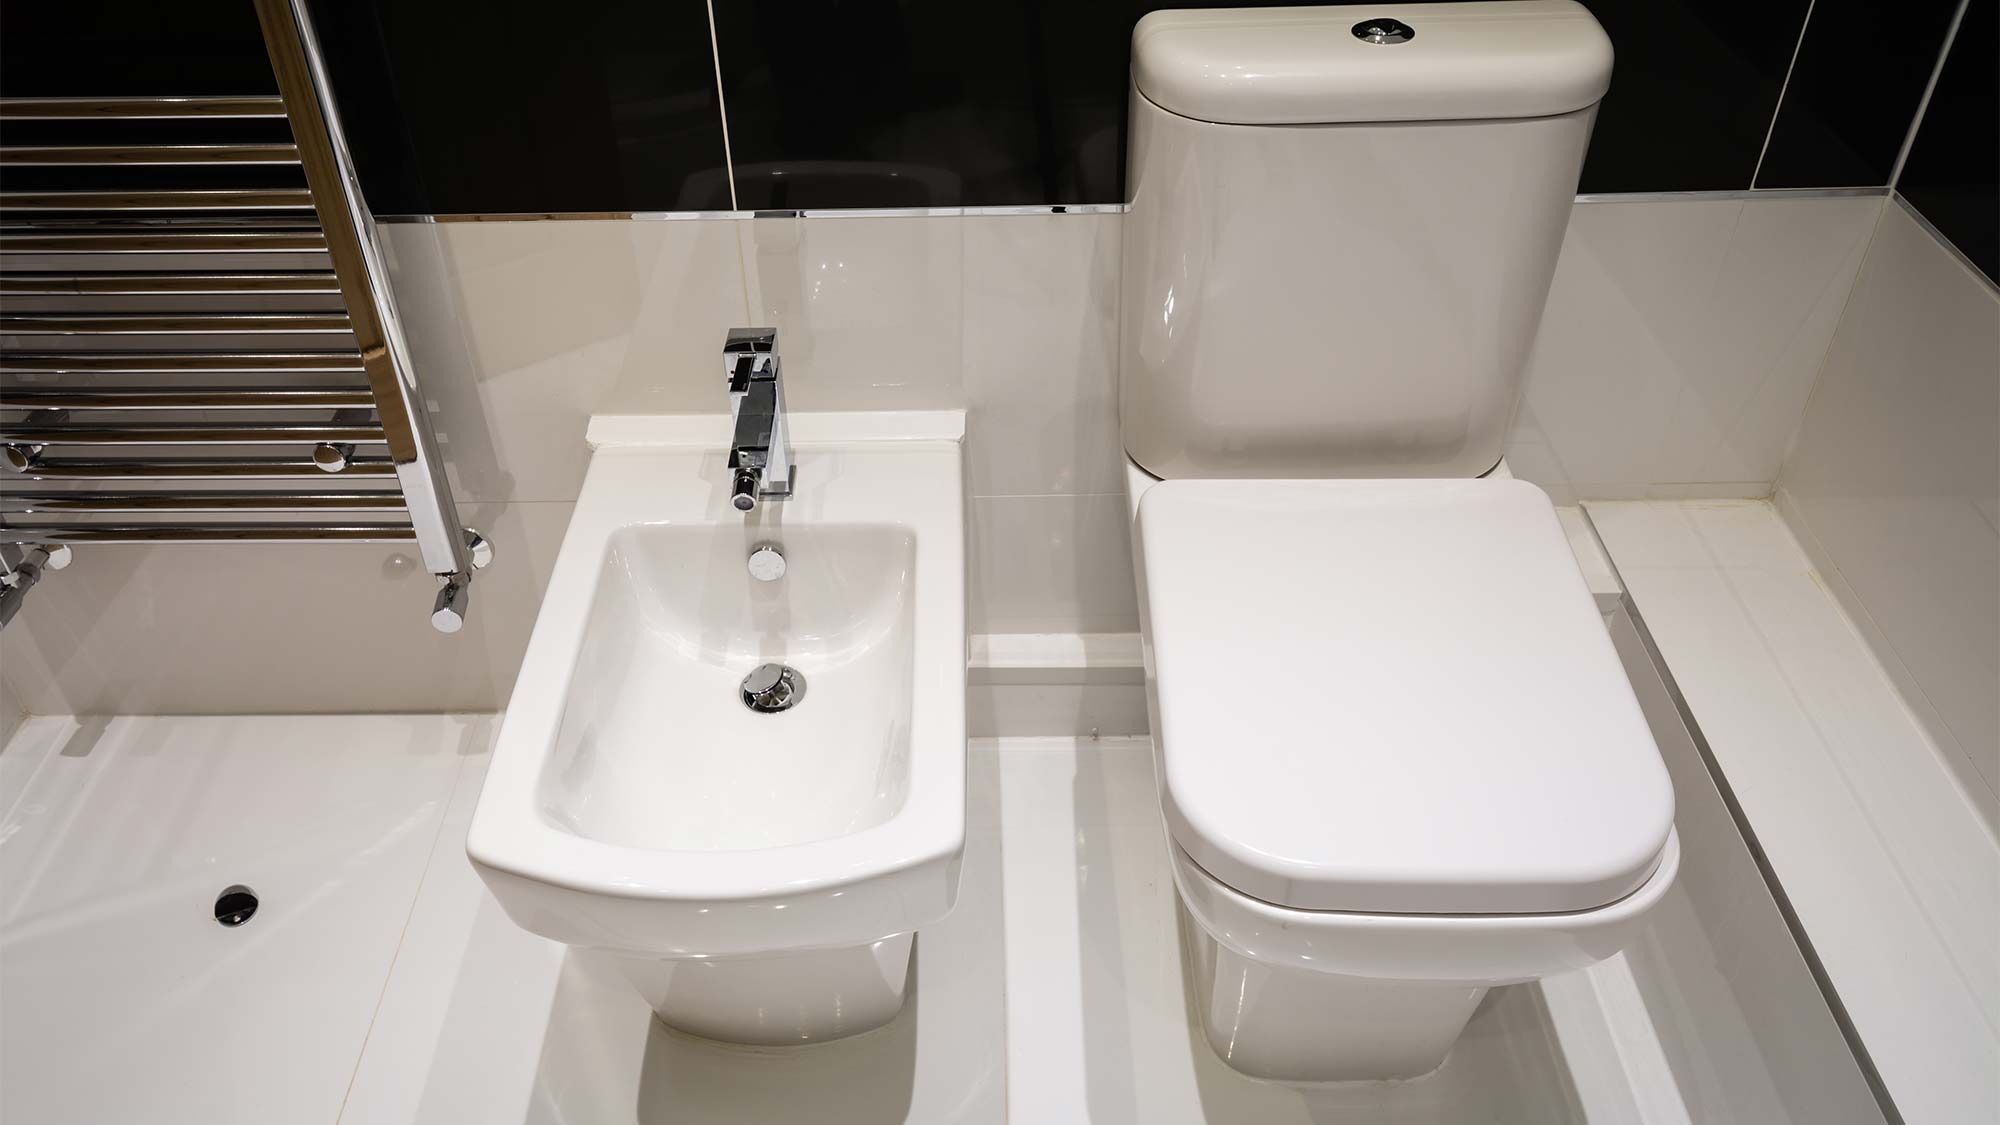 What is a bidet and why should you buy
one: a brief history of the bidet